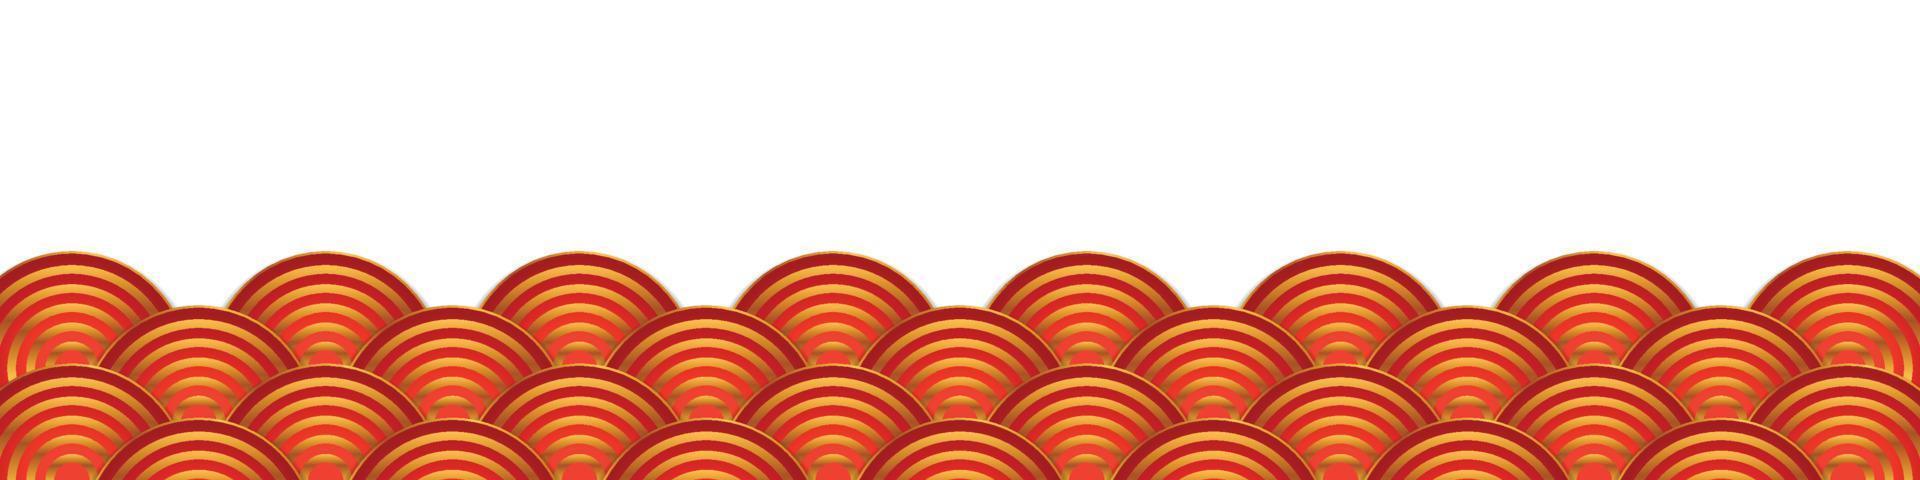 Chinese red abstract ornament pattern background vector